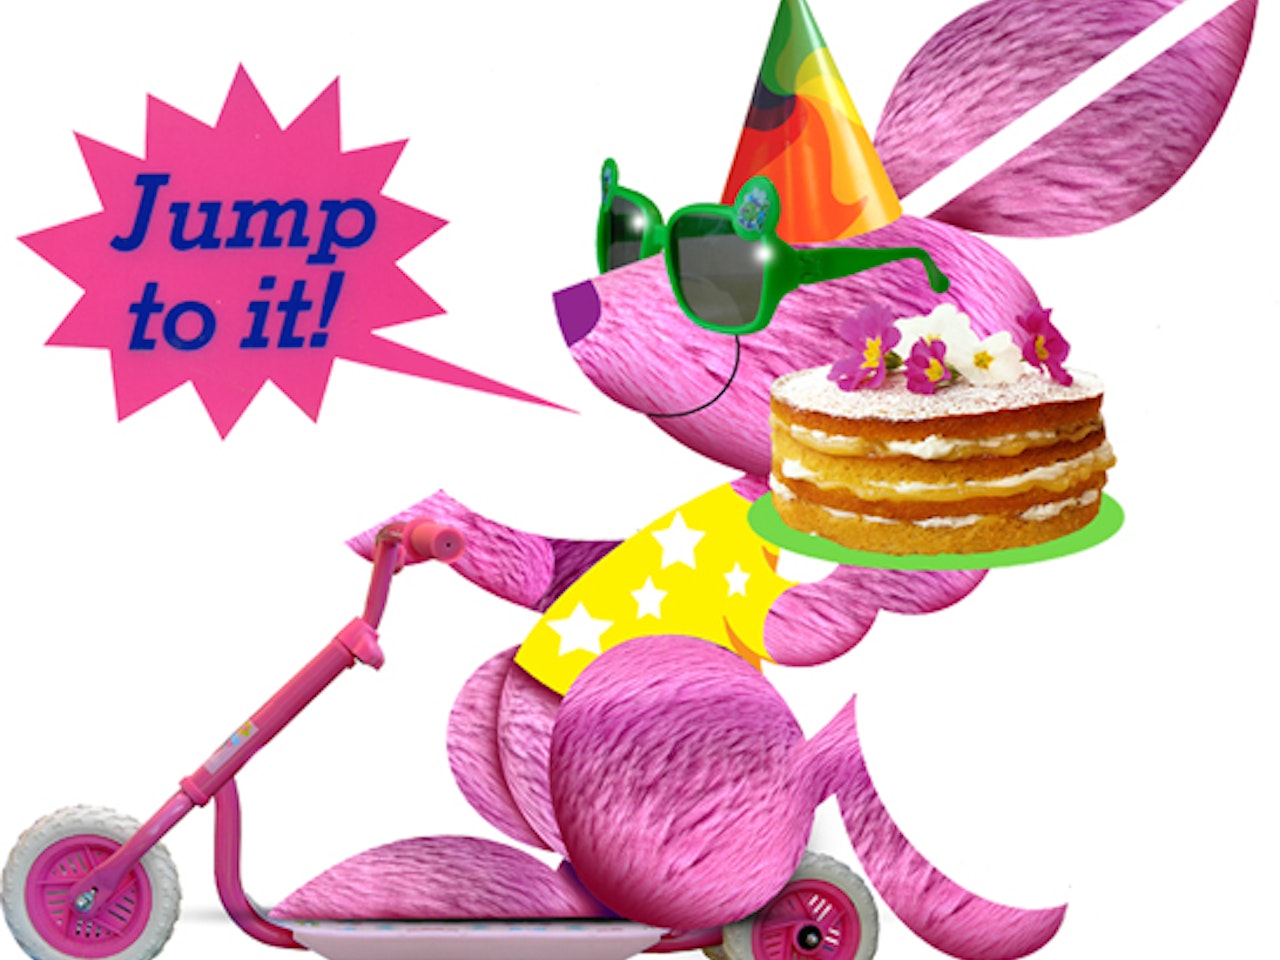 pink rabbit scooter cake party hat collage funny happy humorous comical colourful graphic illustration   retro vintage